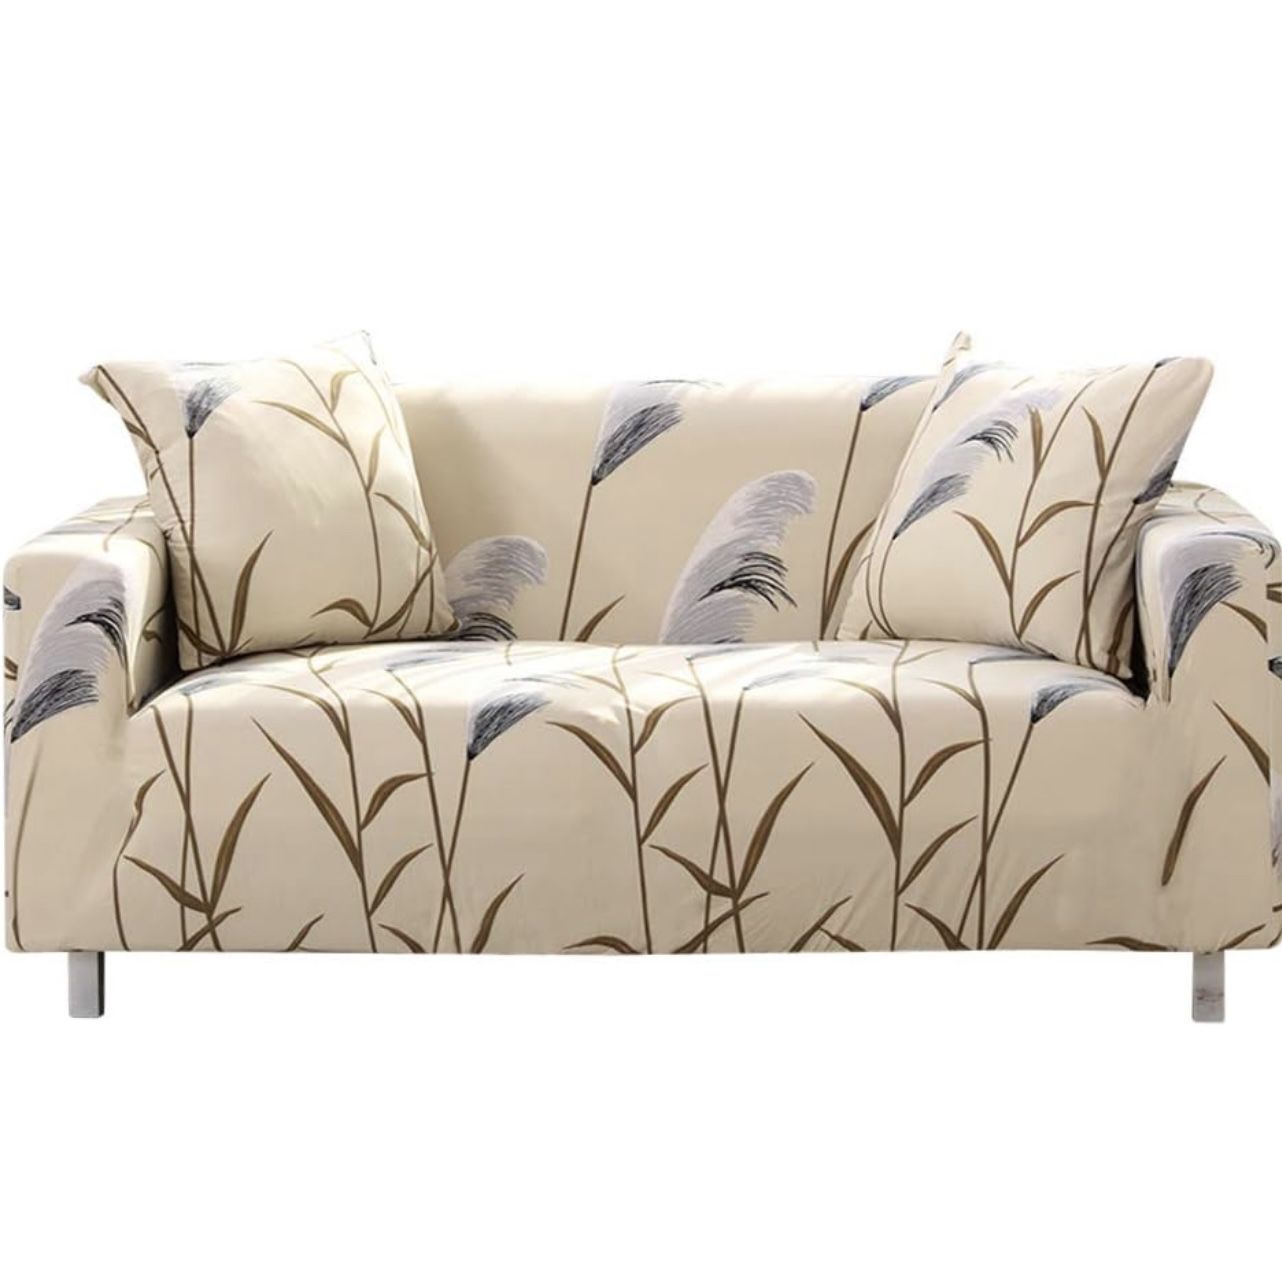 Sofa, Couch With Printed Cover